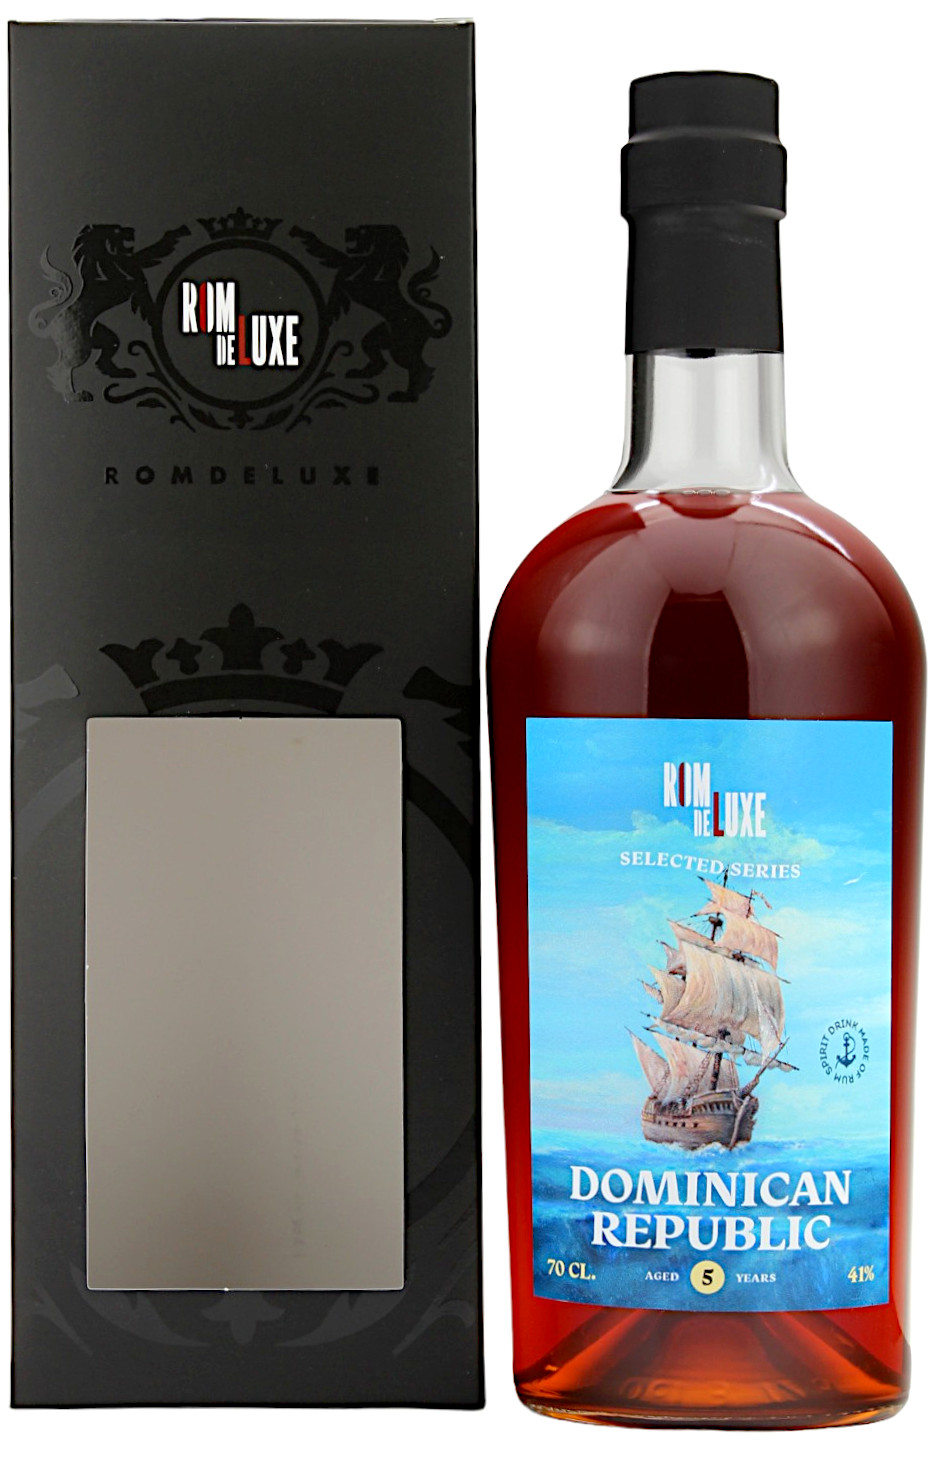 Dominican Republic Selected Series No.2 RomDeLuxe 41.0% 0,7l